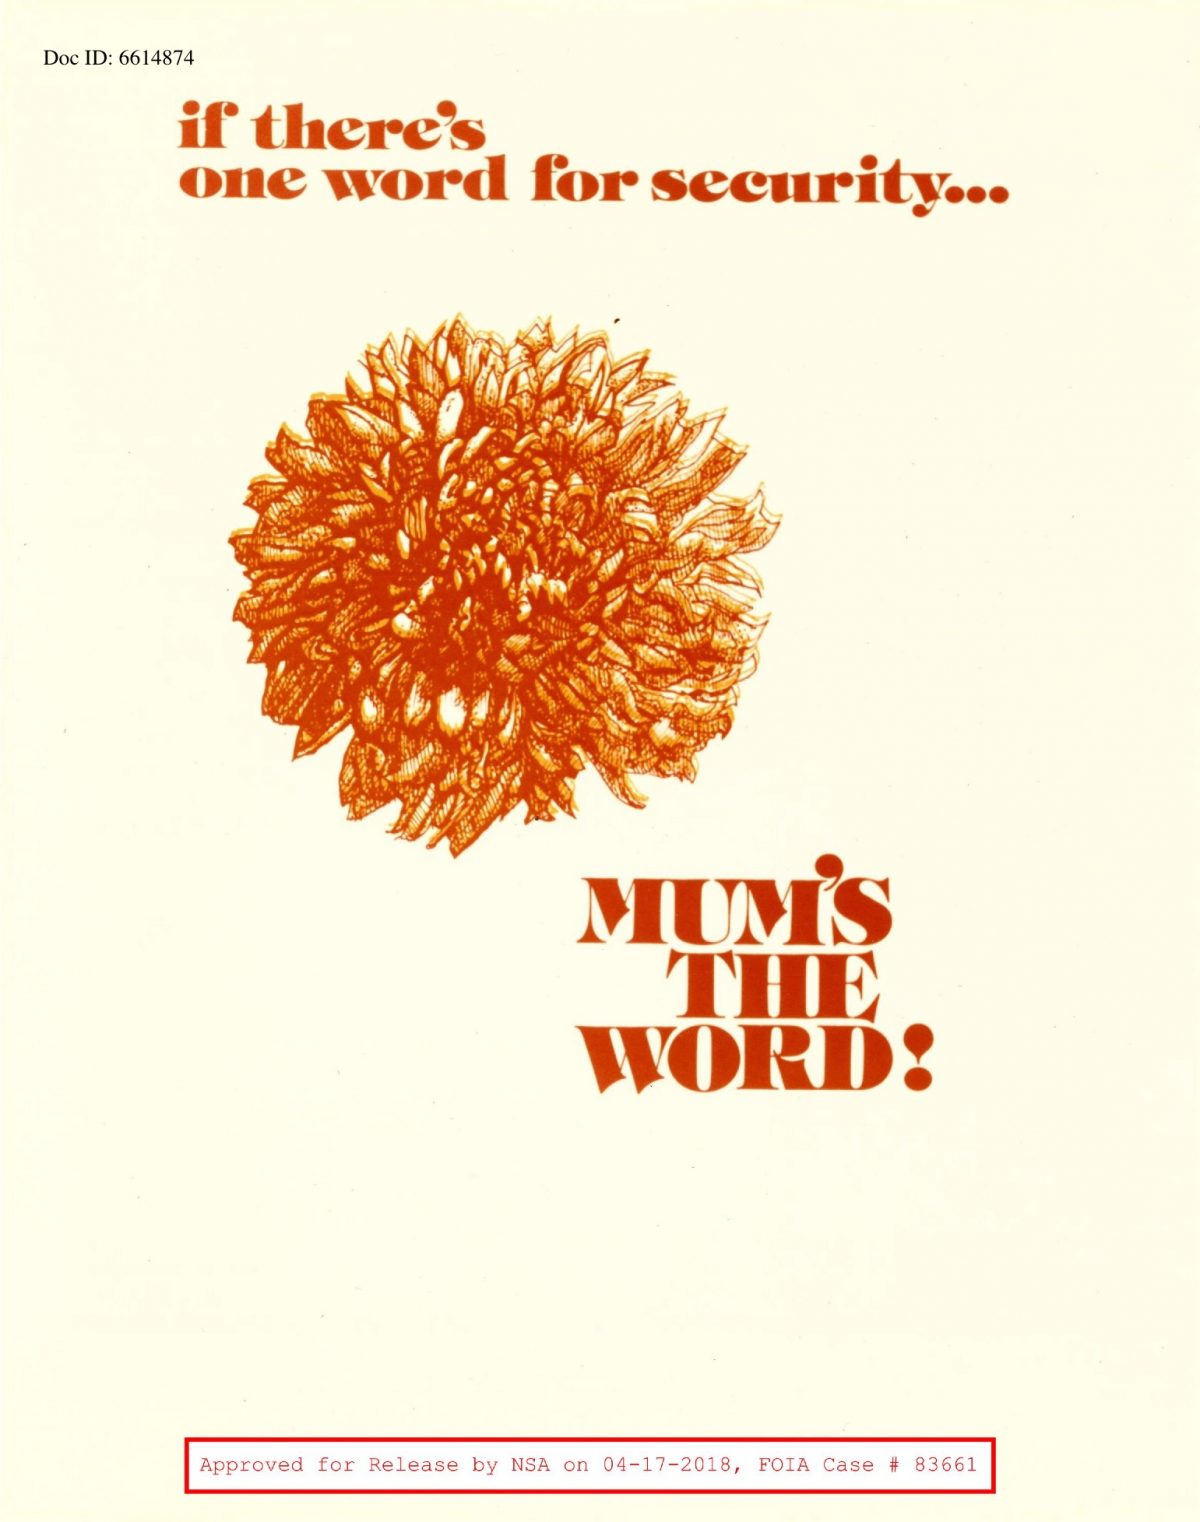 NSA posters 1950s 1960s